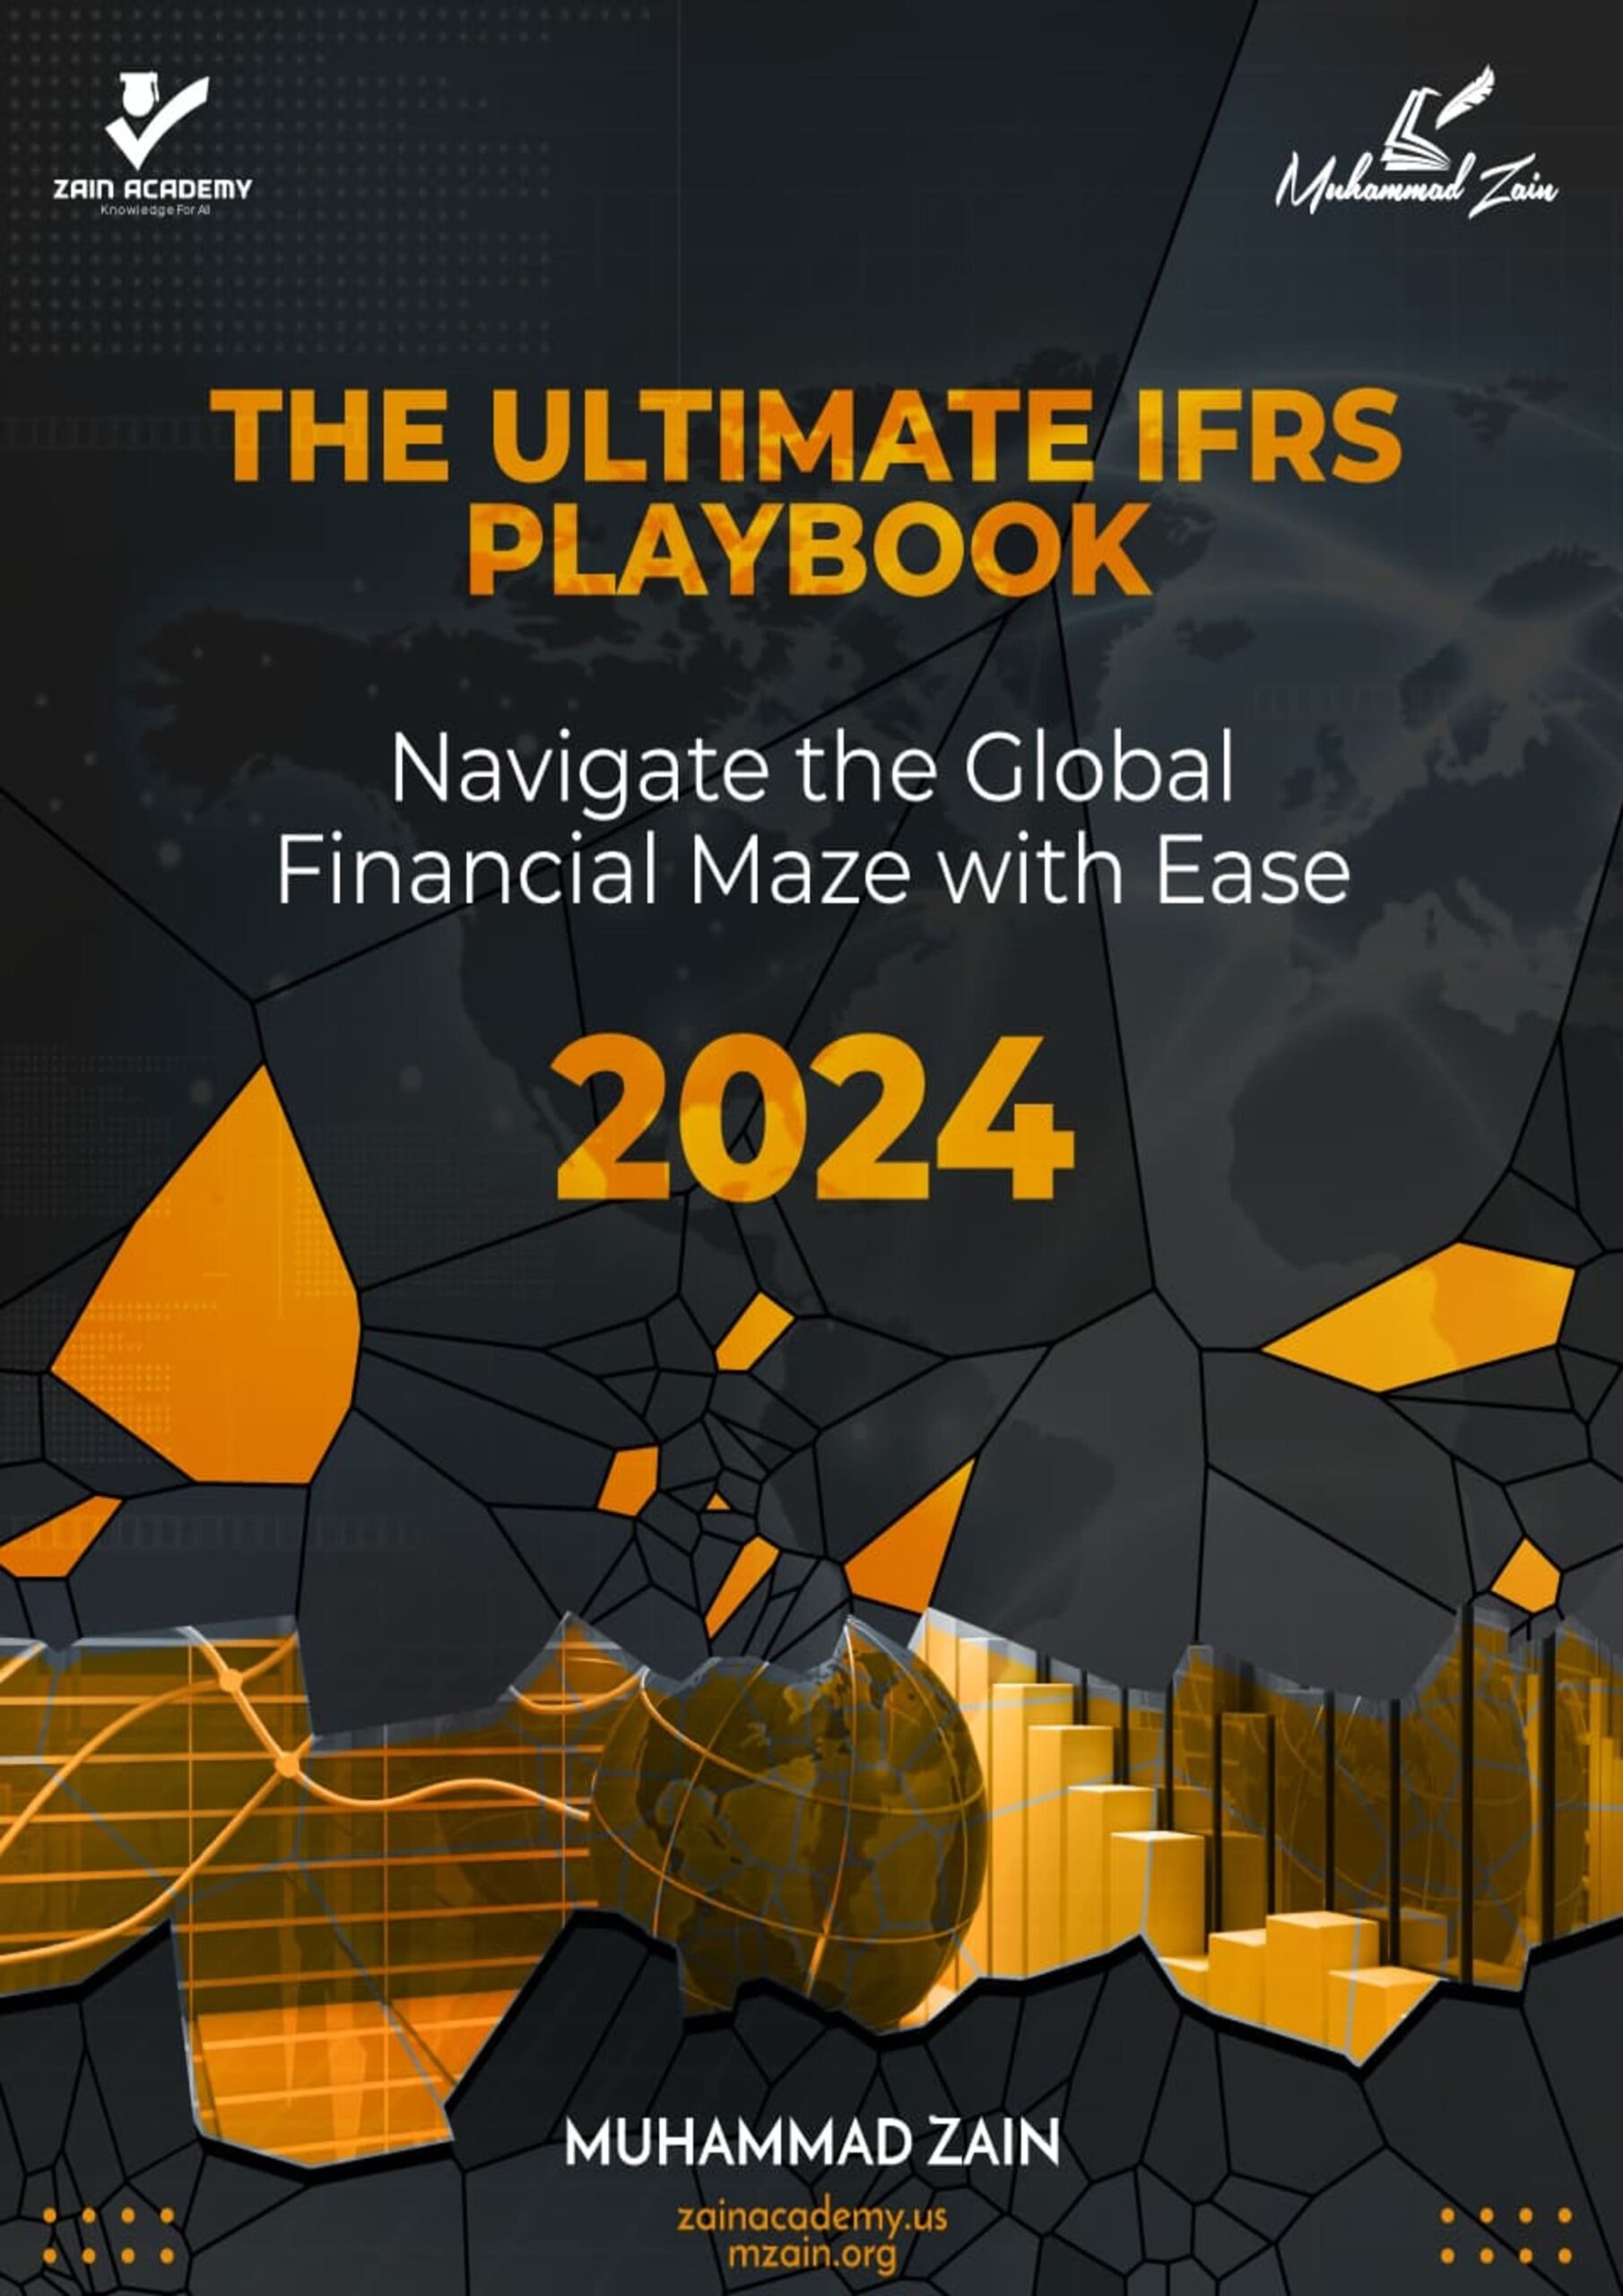 The Ultimate IFRS Playbook 2024: Navigate the Global Financial Maze with Ease. The book serves as an authoritative guide to understanding and implementing International Financial Reporting Standards (IFRS) in global finance contexts